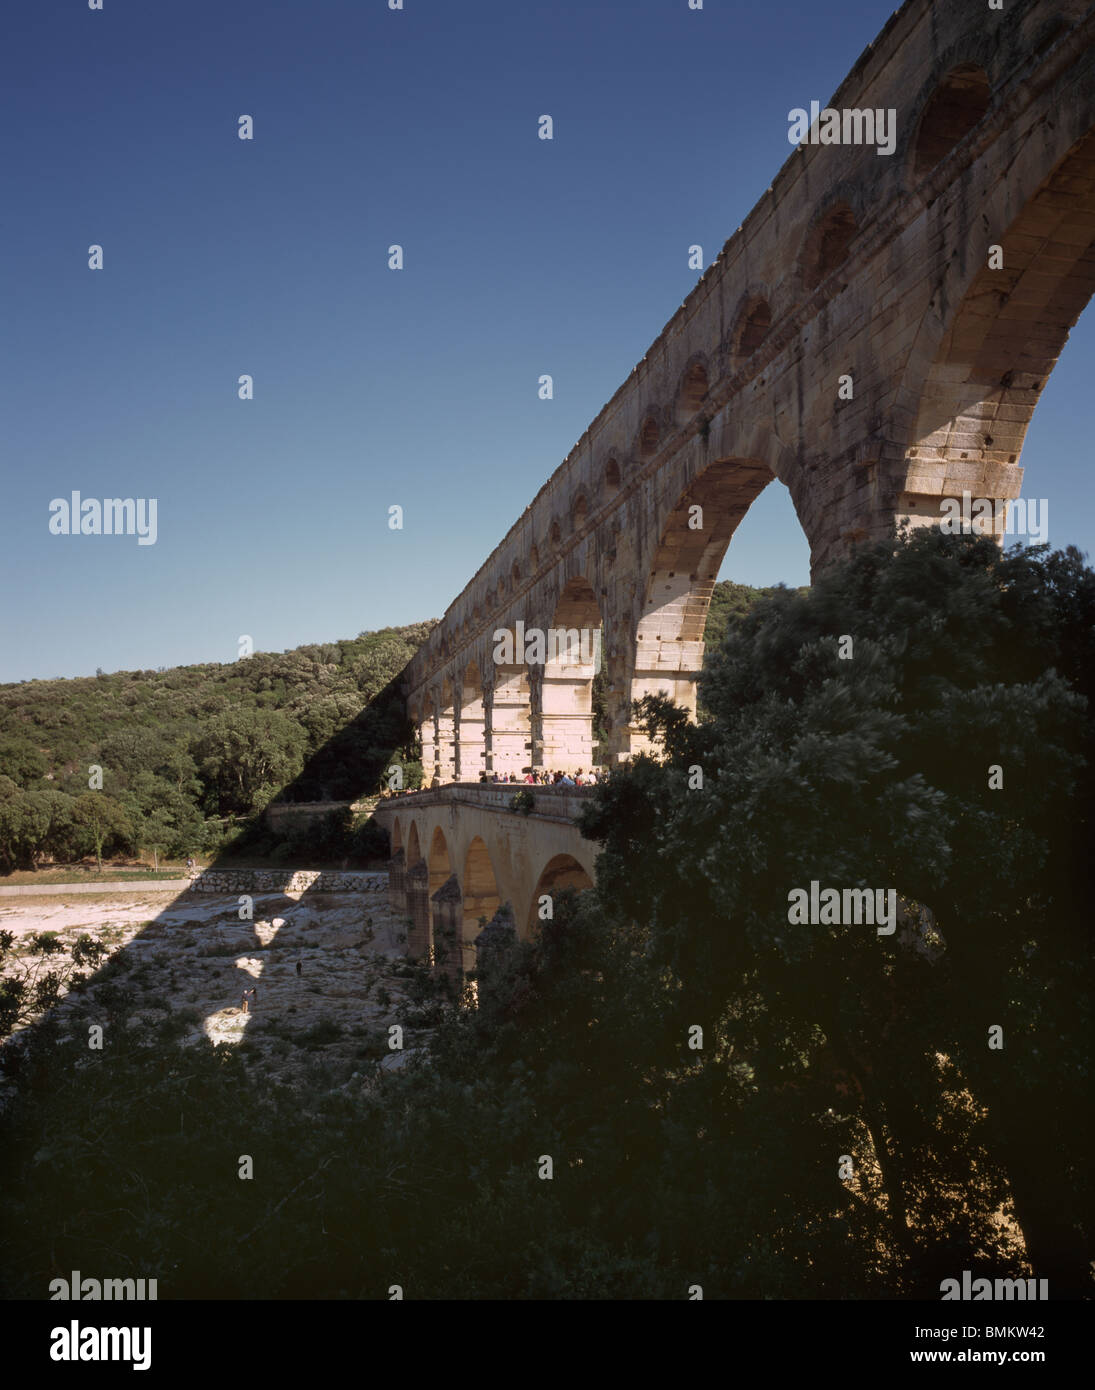 Pont du Gard France. 1st century Roman aqueduct, with three rows of arches. Stock Photo